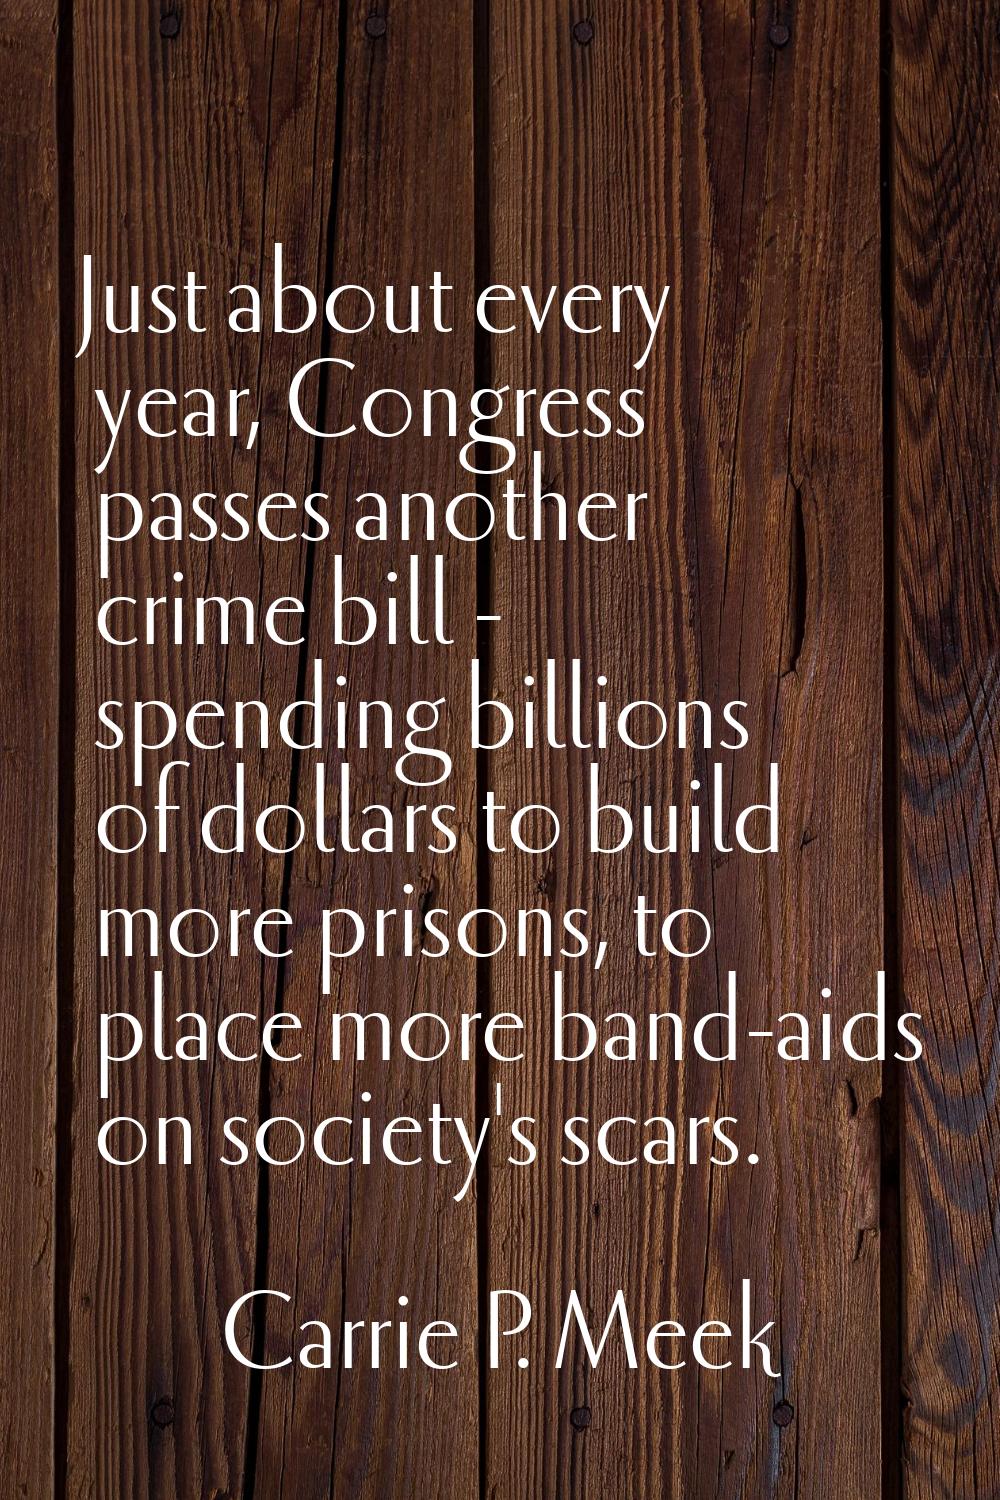 Just about every year, Congress passes another crime bill - spending billions of dollars to build m